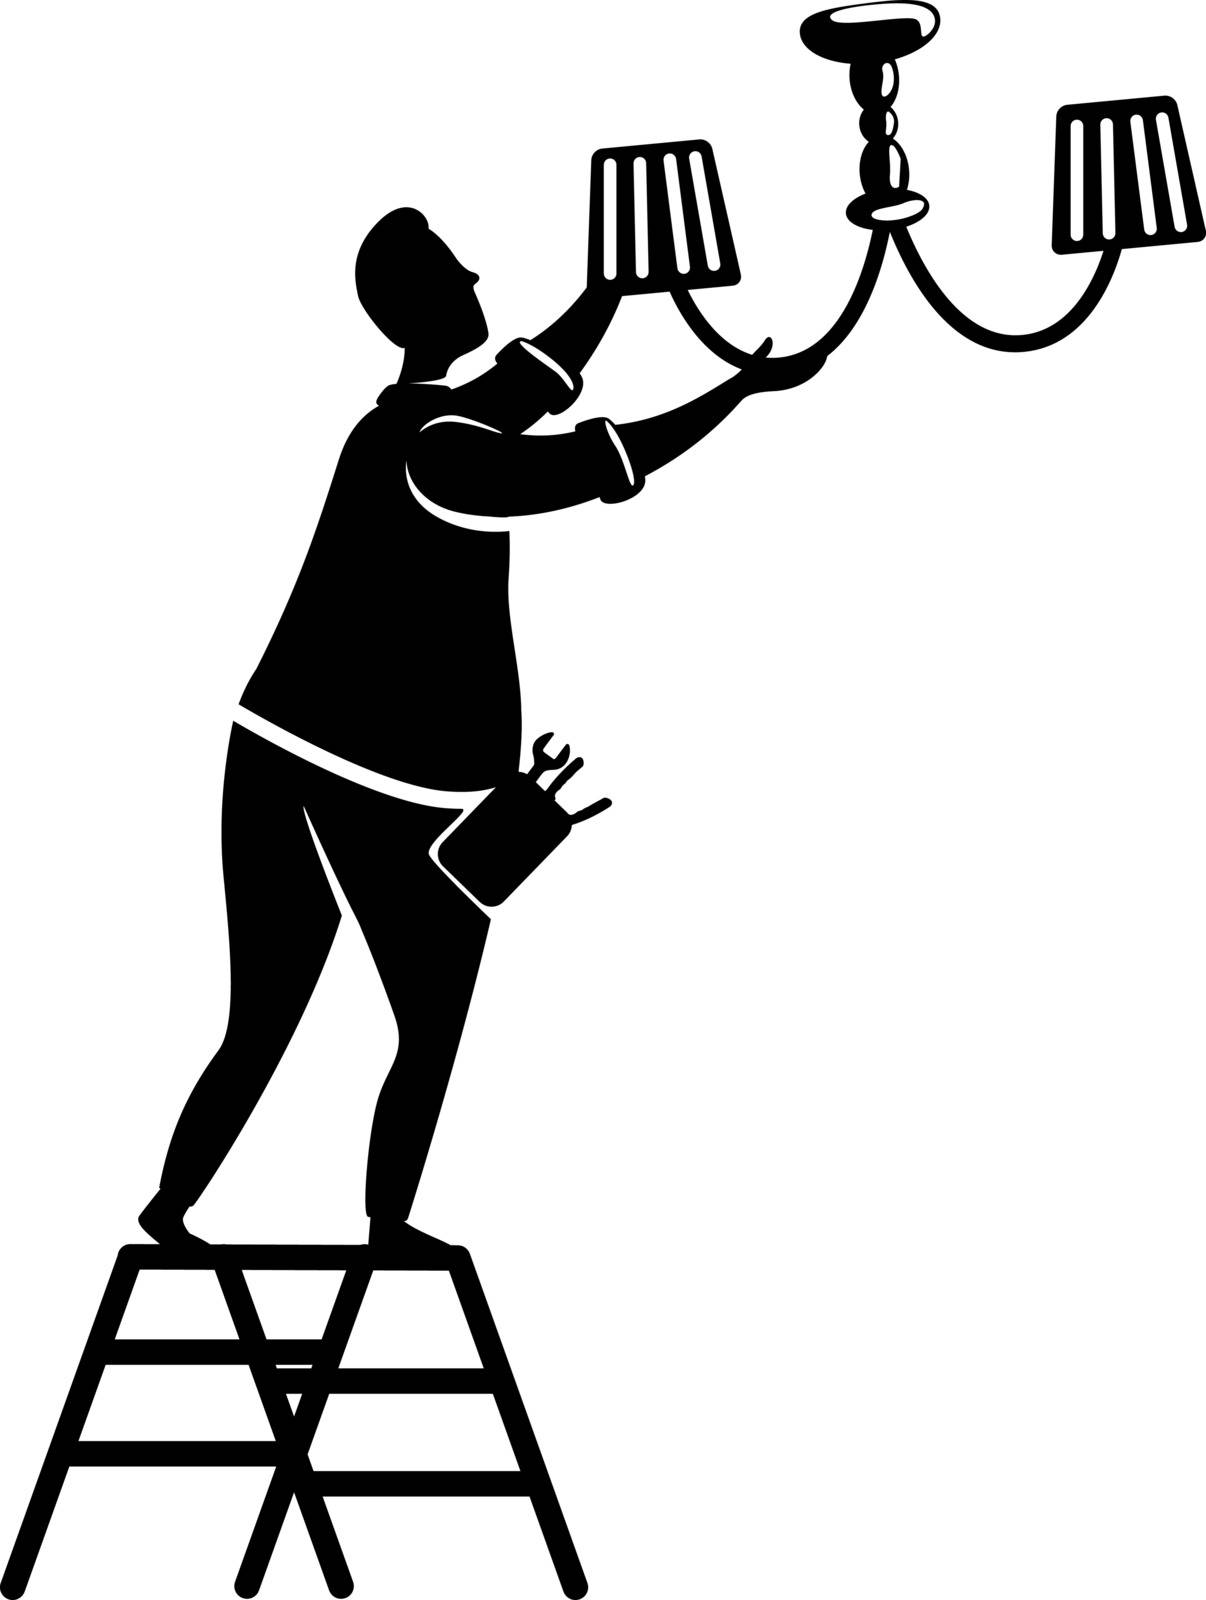 Man fixes chandelier black silhouette vector illustration. Guy changes lightbulb. Home repairs. Working person pose. Handyman 2d cartoon character shape for commercial, animation, printing. ZIP file contains: EPS, JPG.